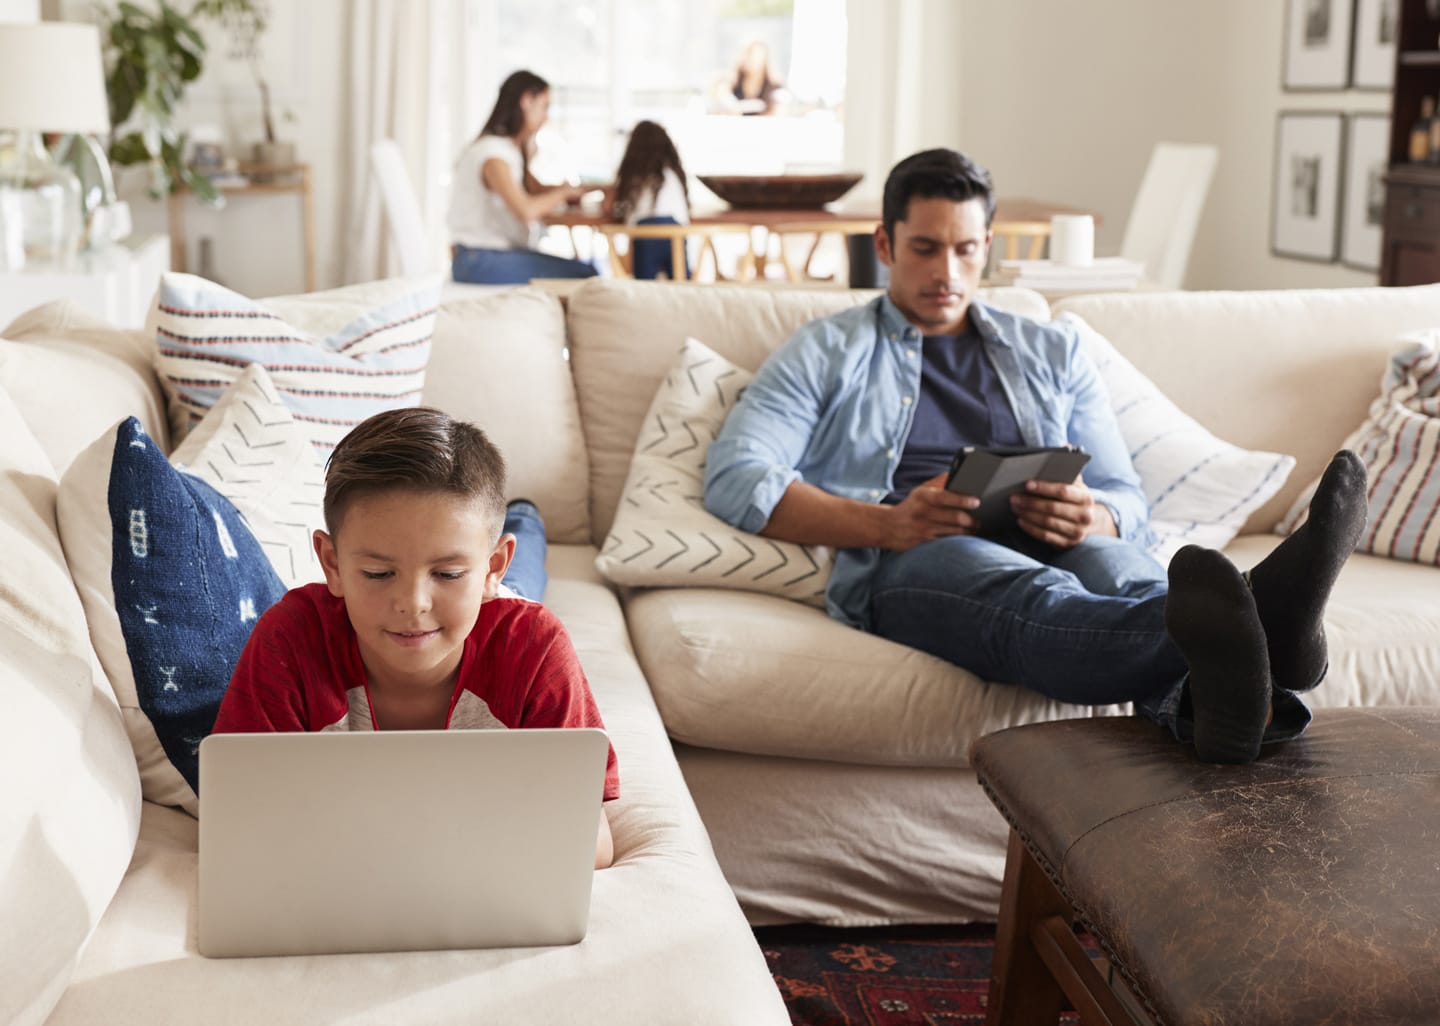 A family all using their devices at the same time